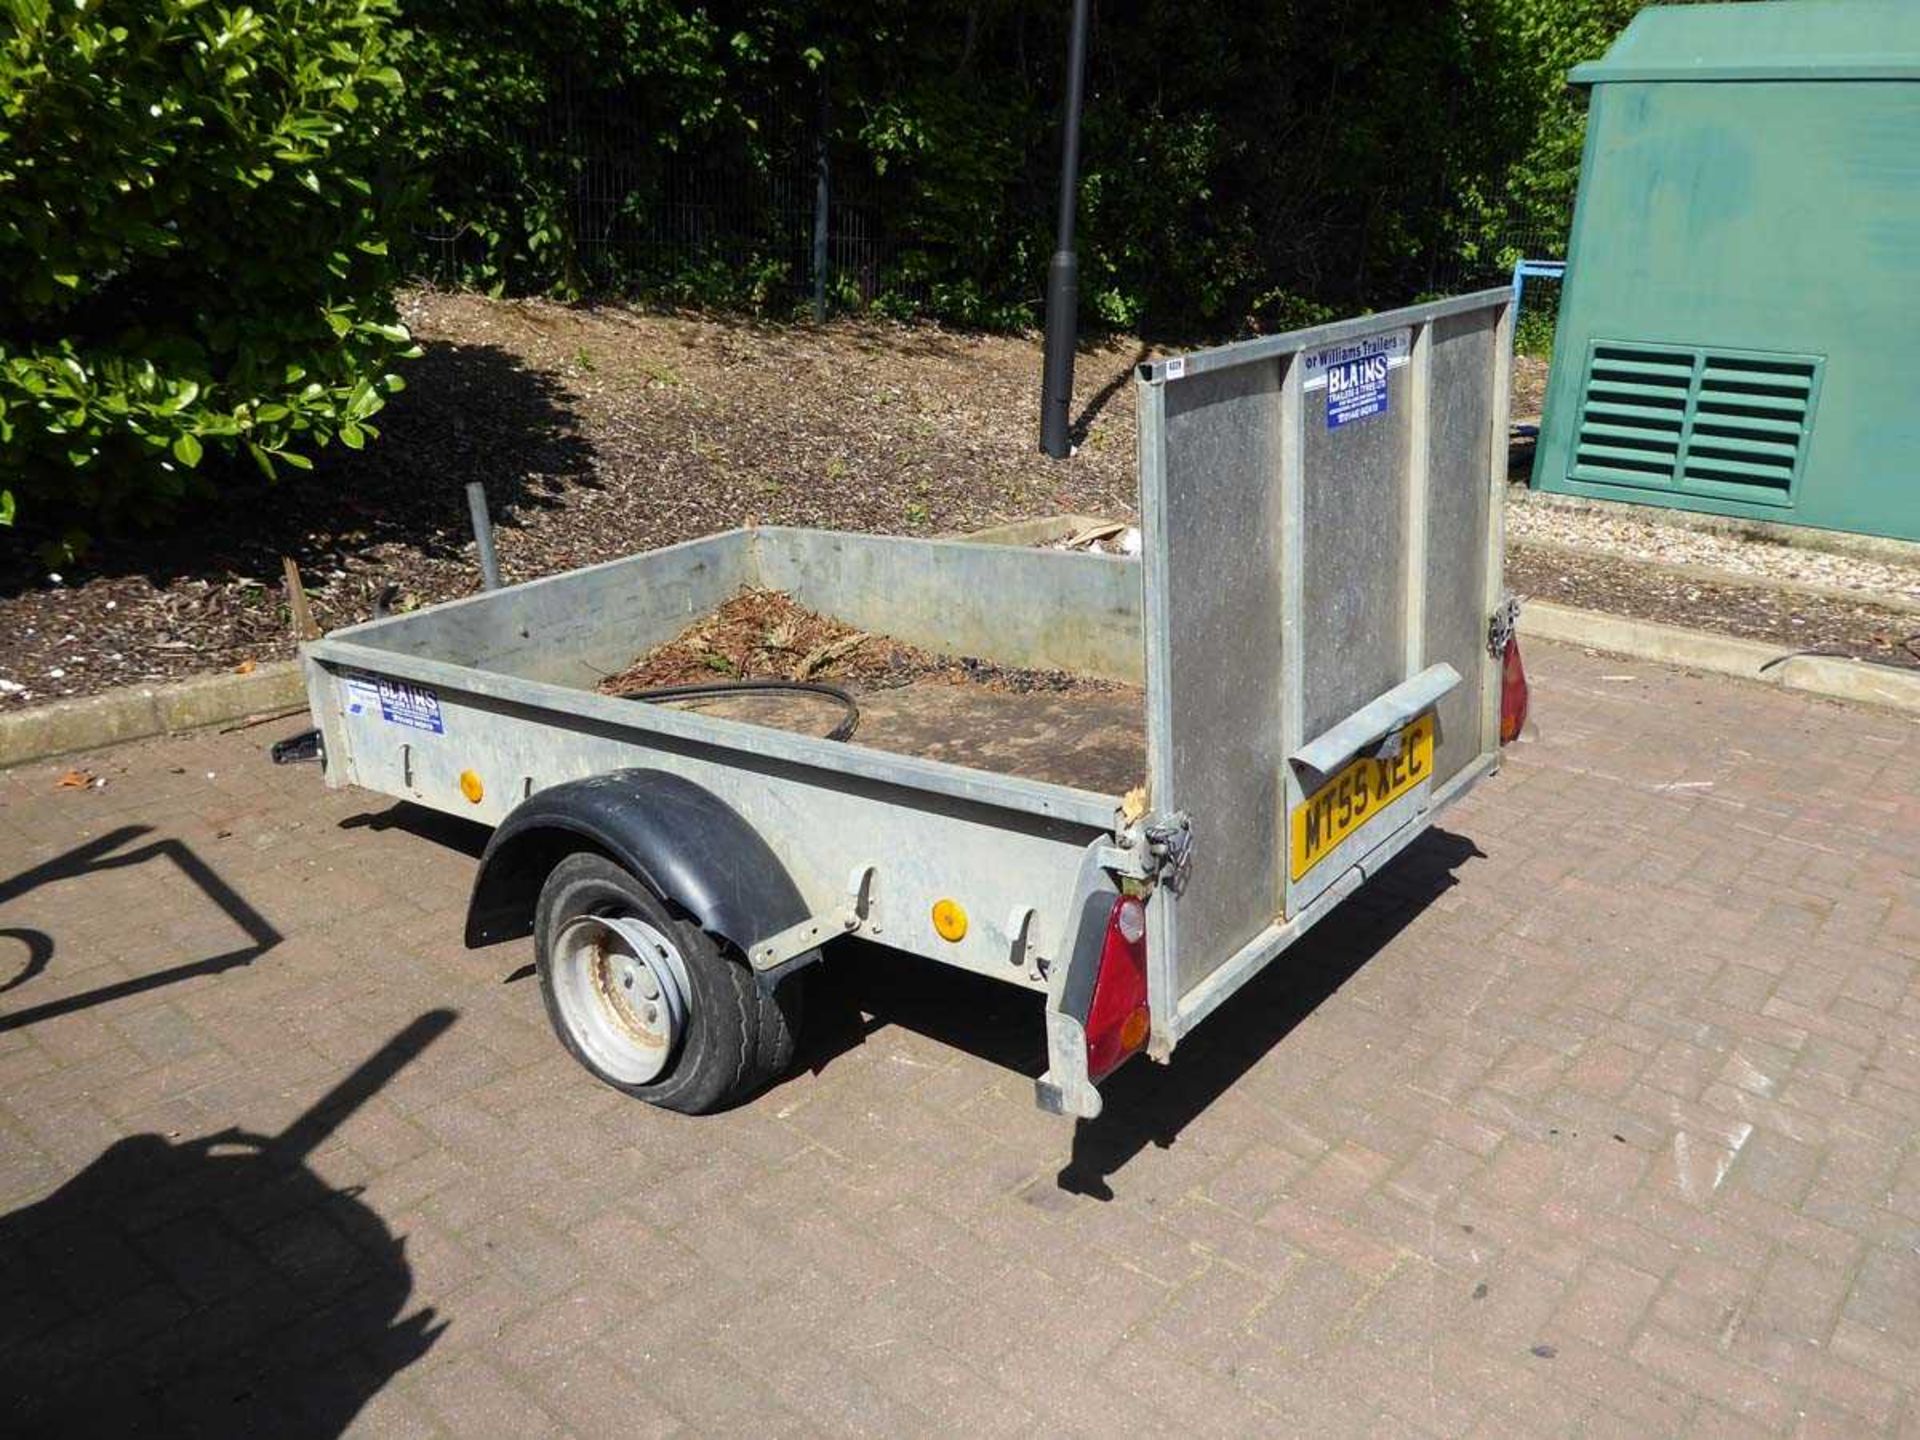 Ifor Williams single axle galvanised trailer with ramp (punctured tyre)